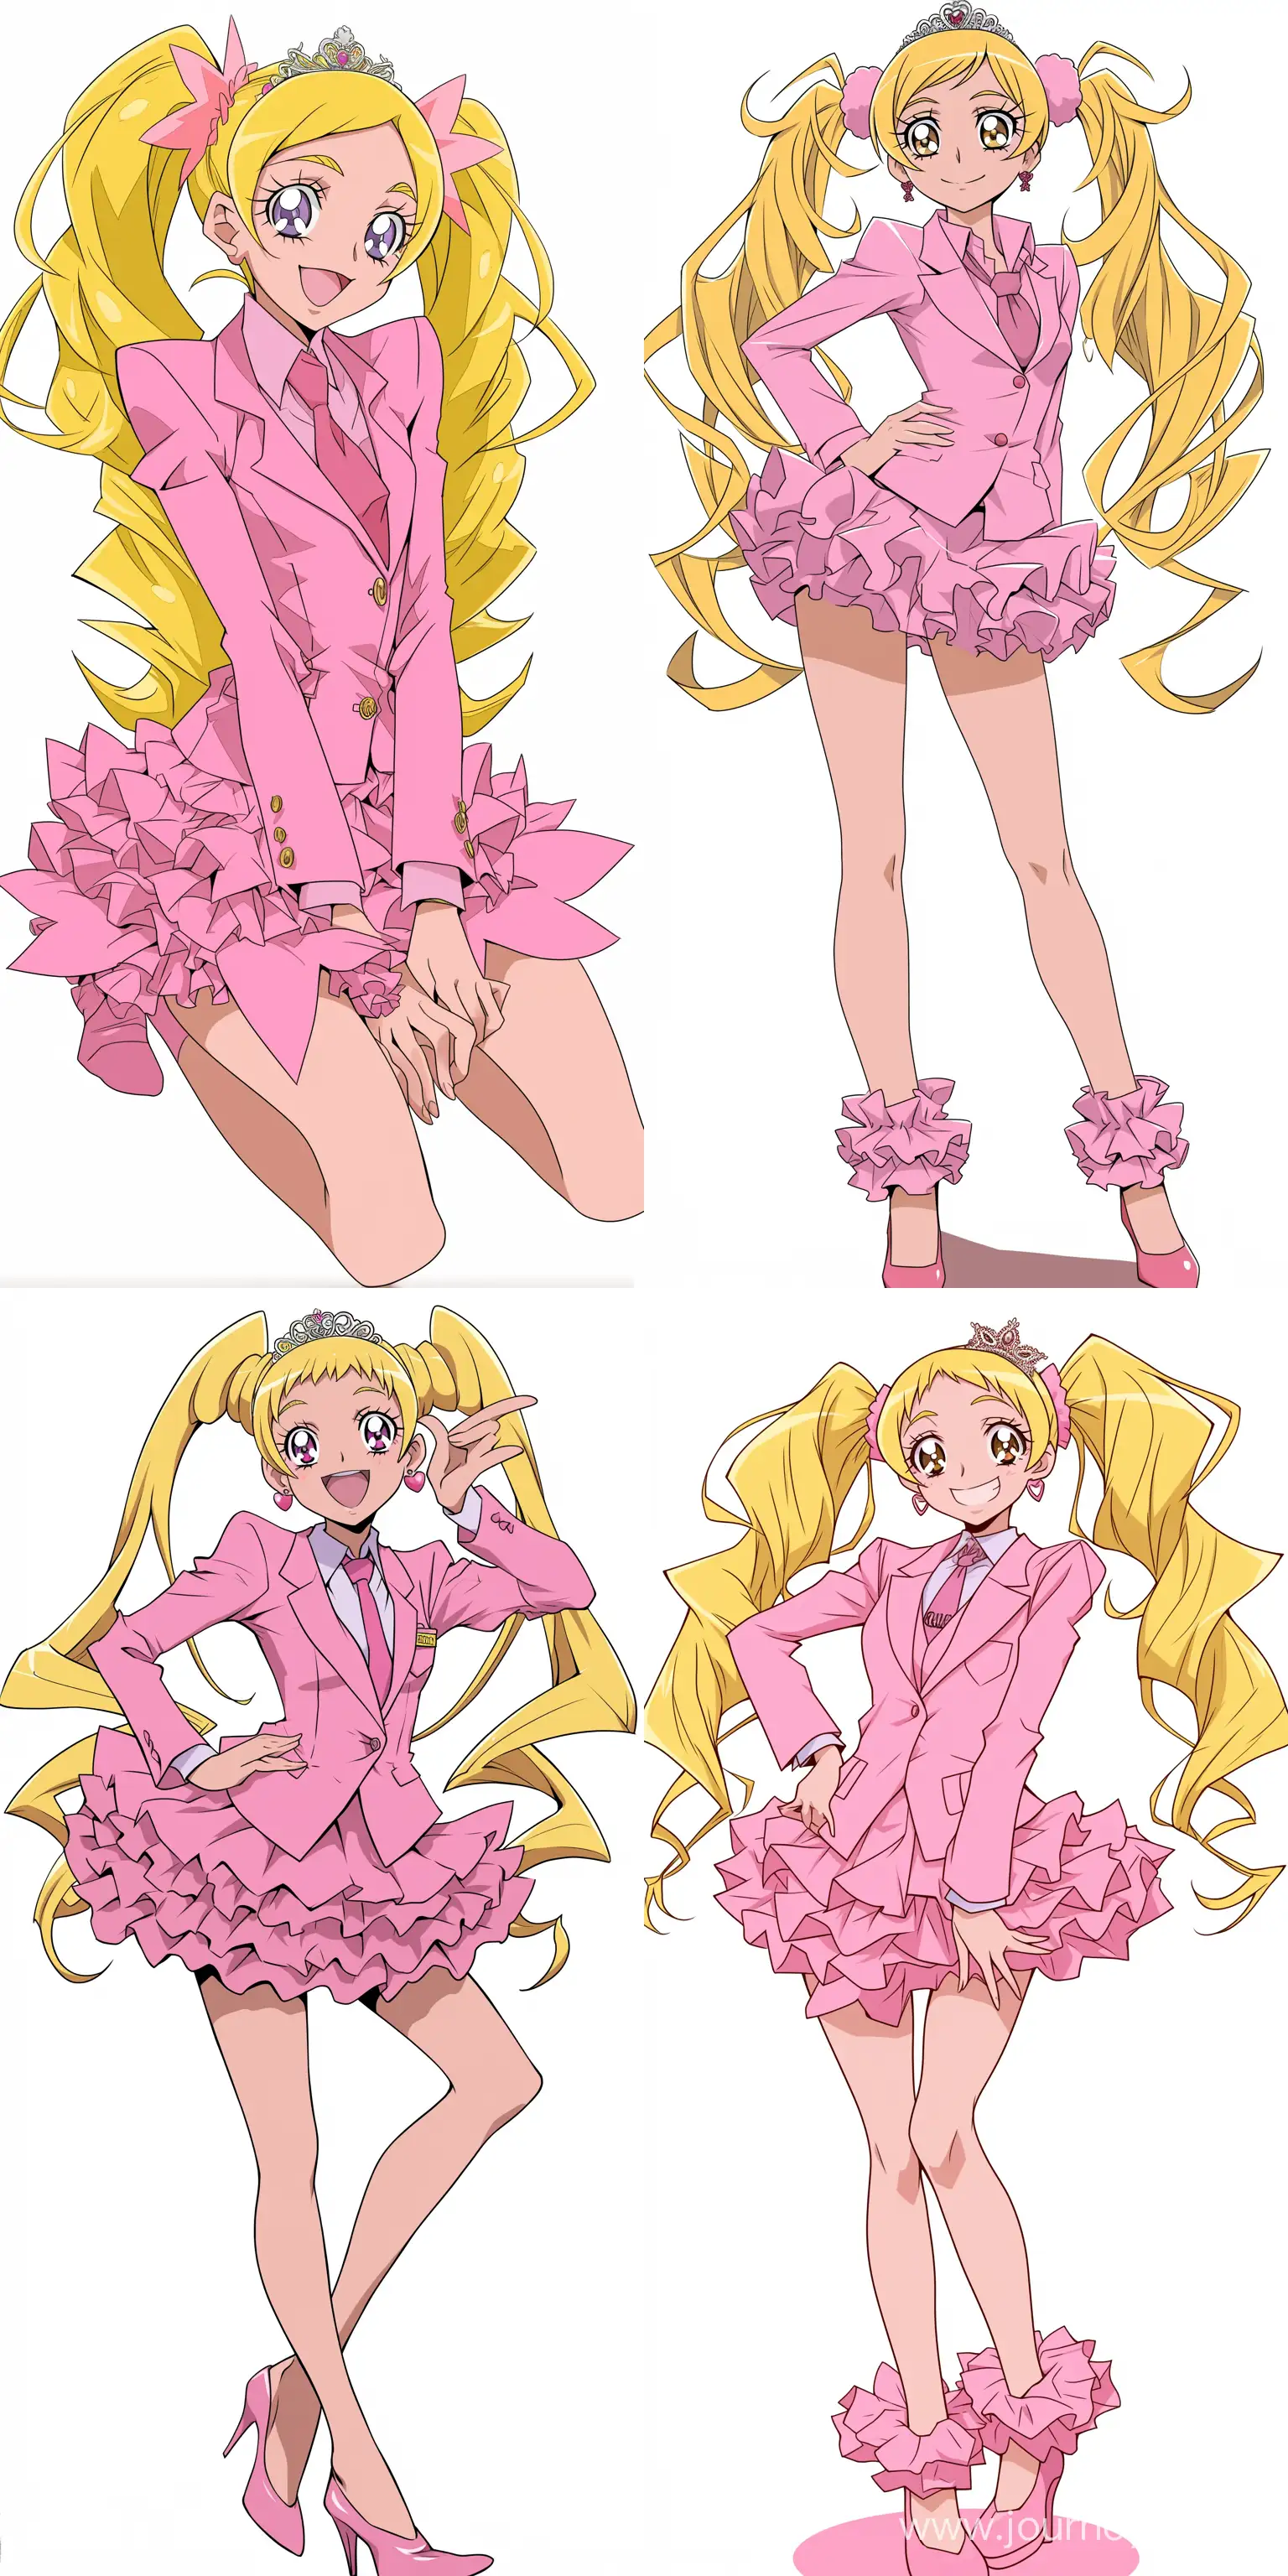 Elegant-Pink-Gucci-Business-Suit-Magical-Girl-with-Tiara-and-Frilly-Skirt